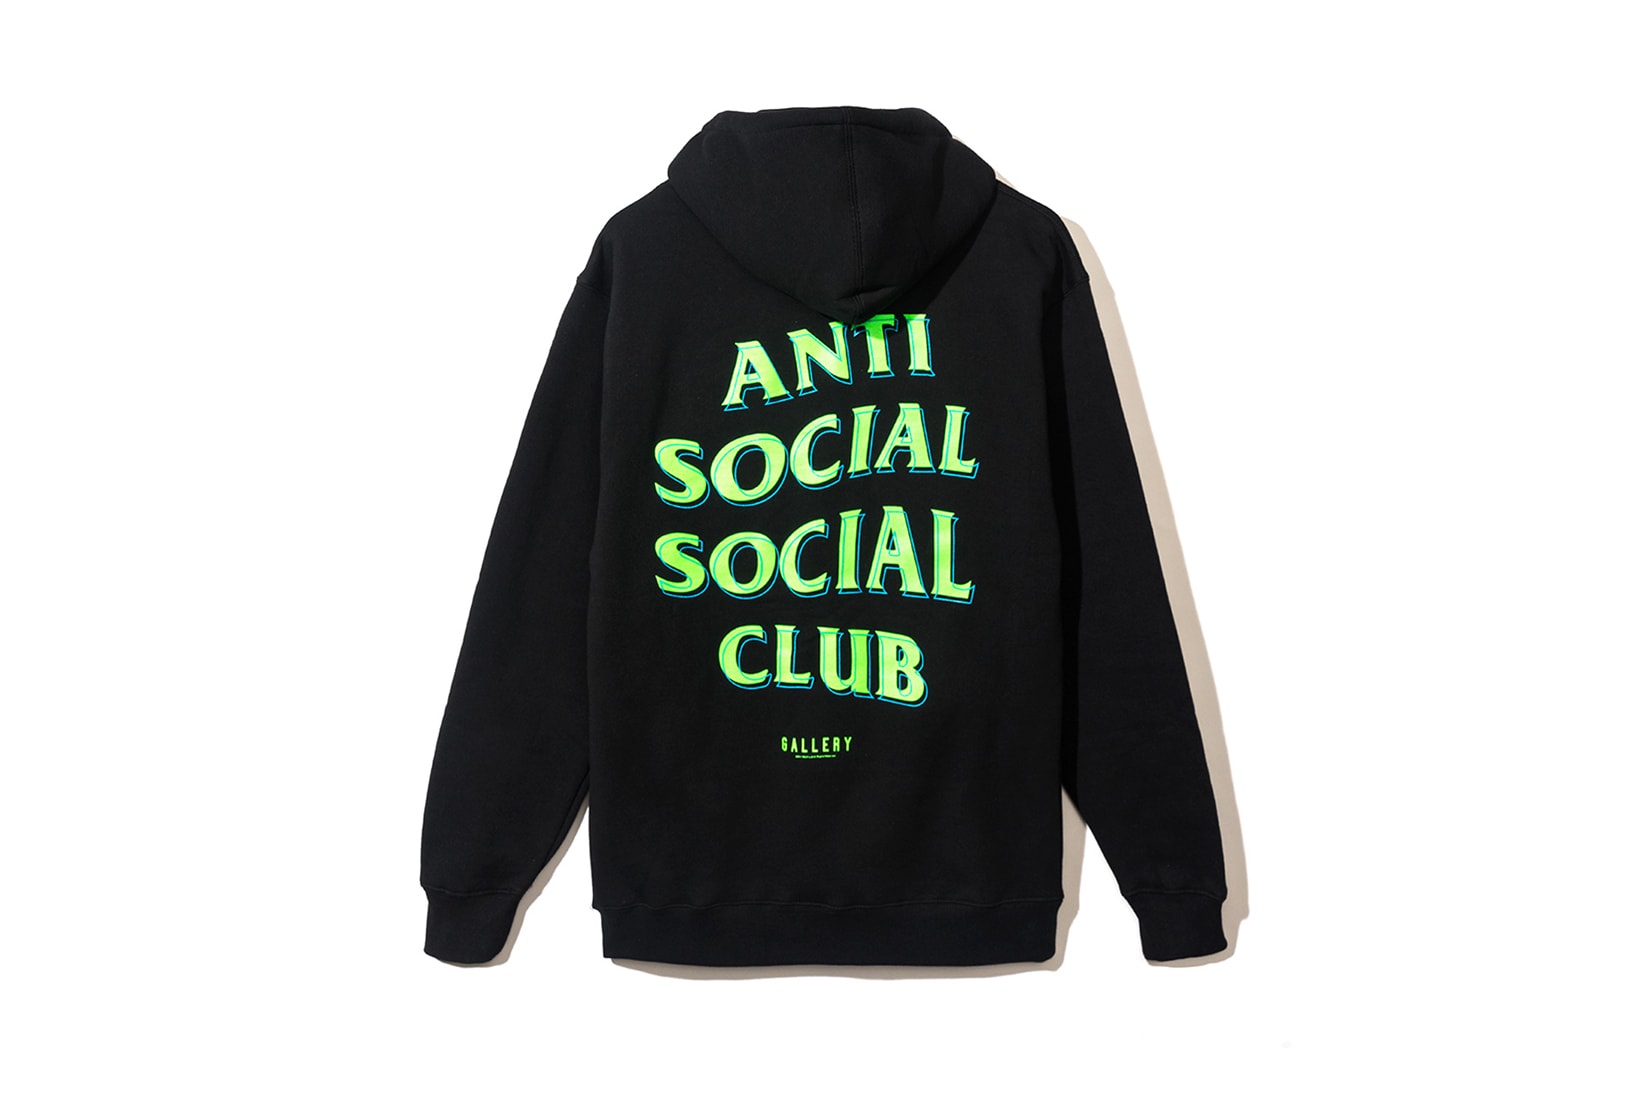 RSVP Gallery Anti Social Social Club Collaboration First Look G Wagon Los Angeles